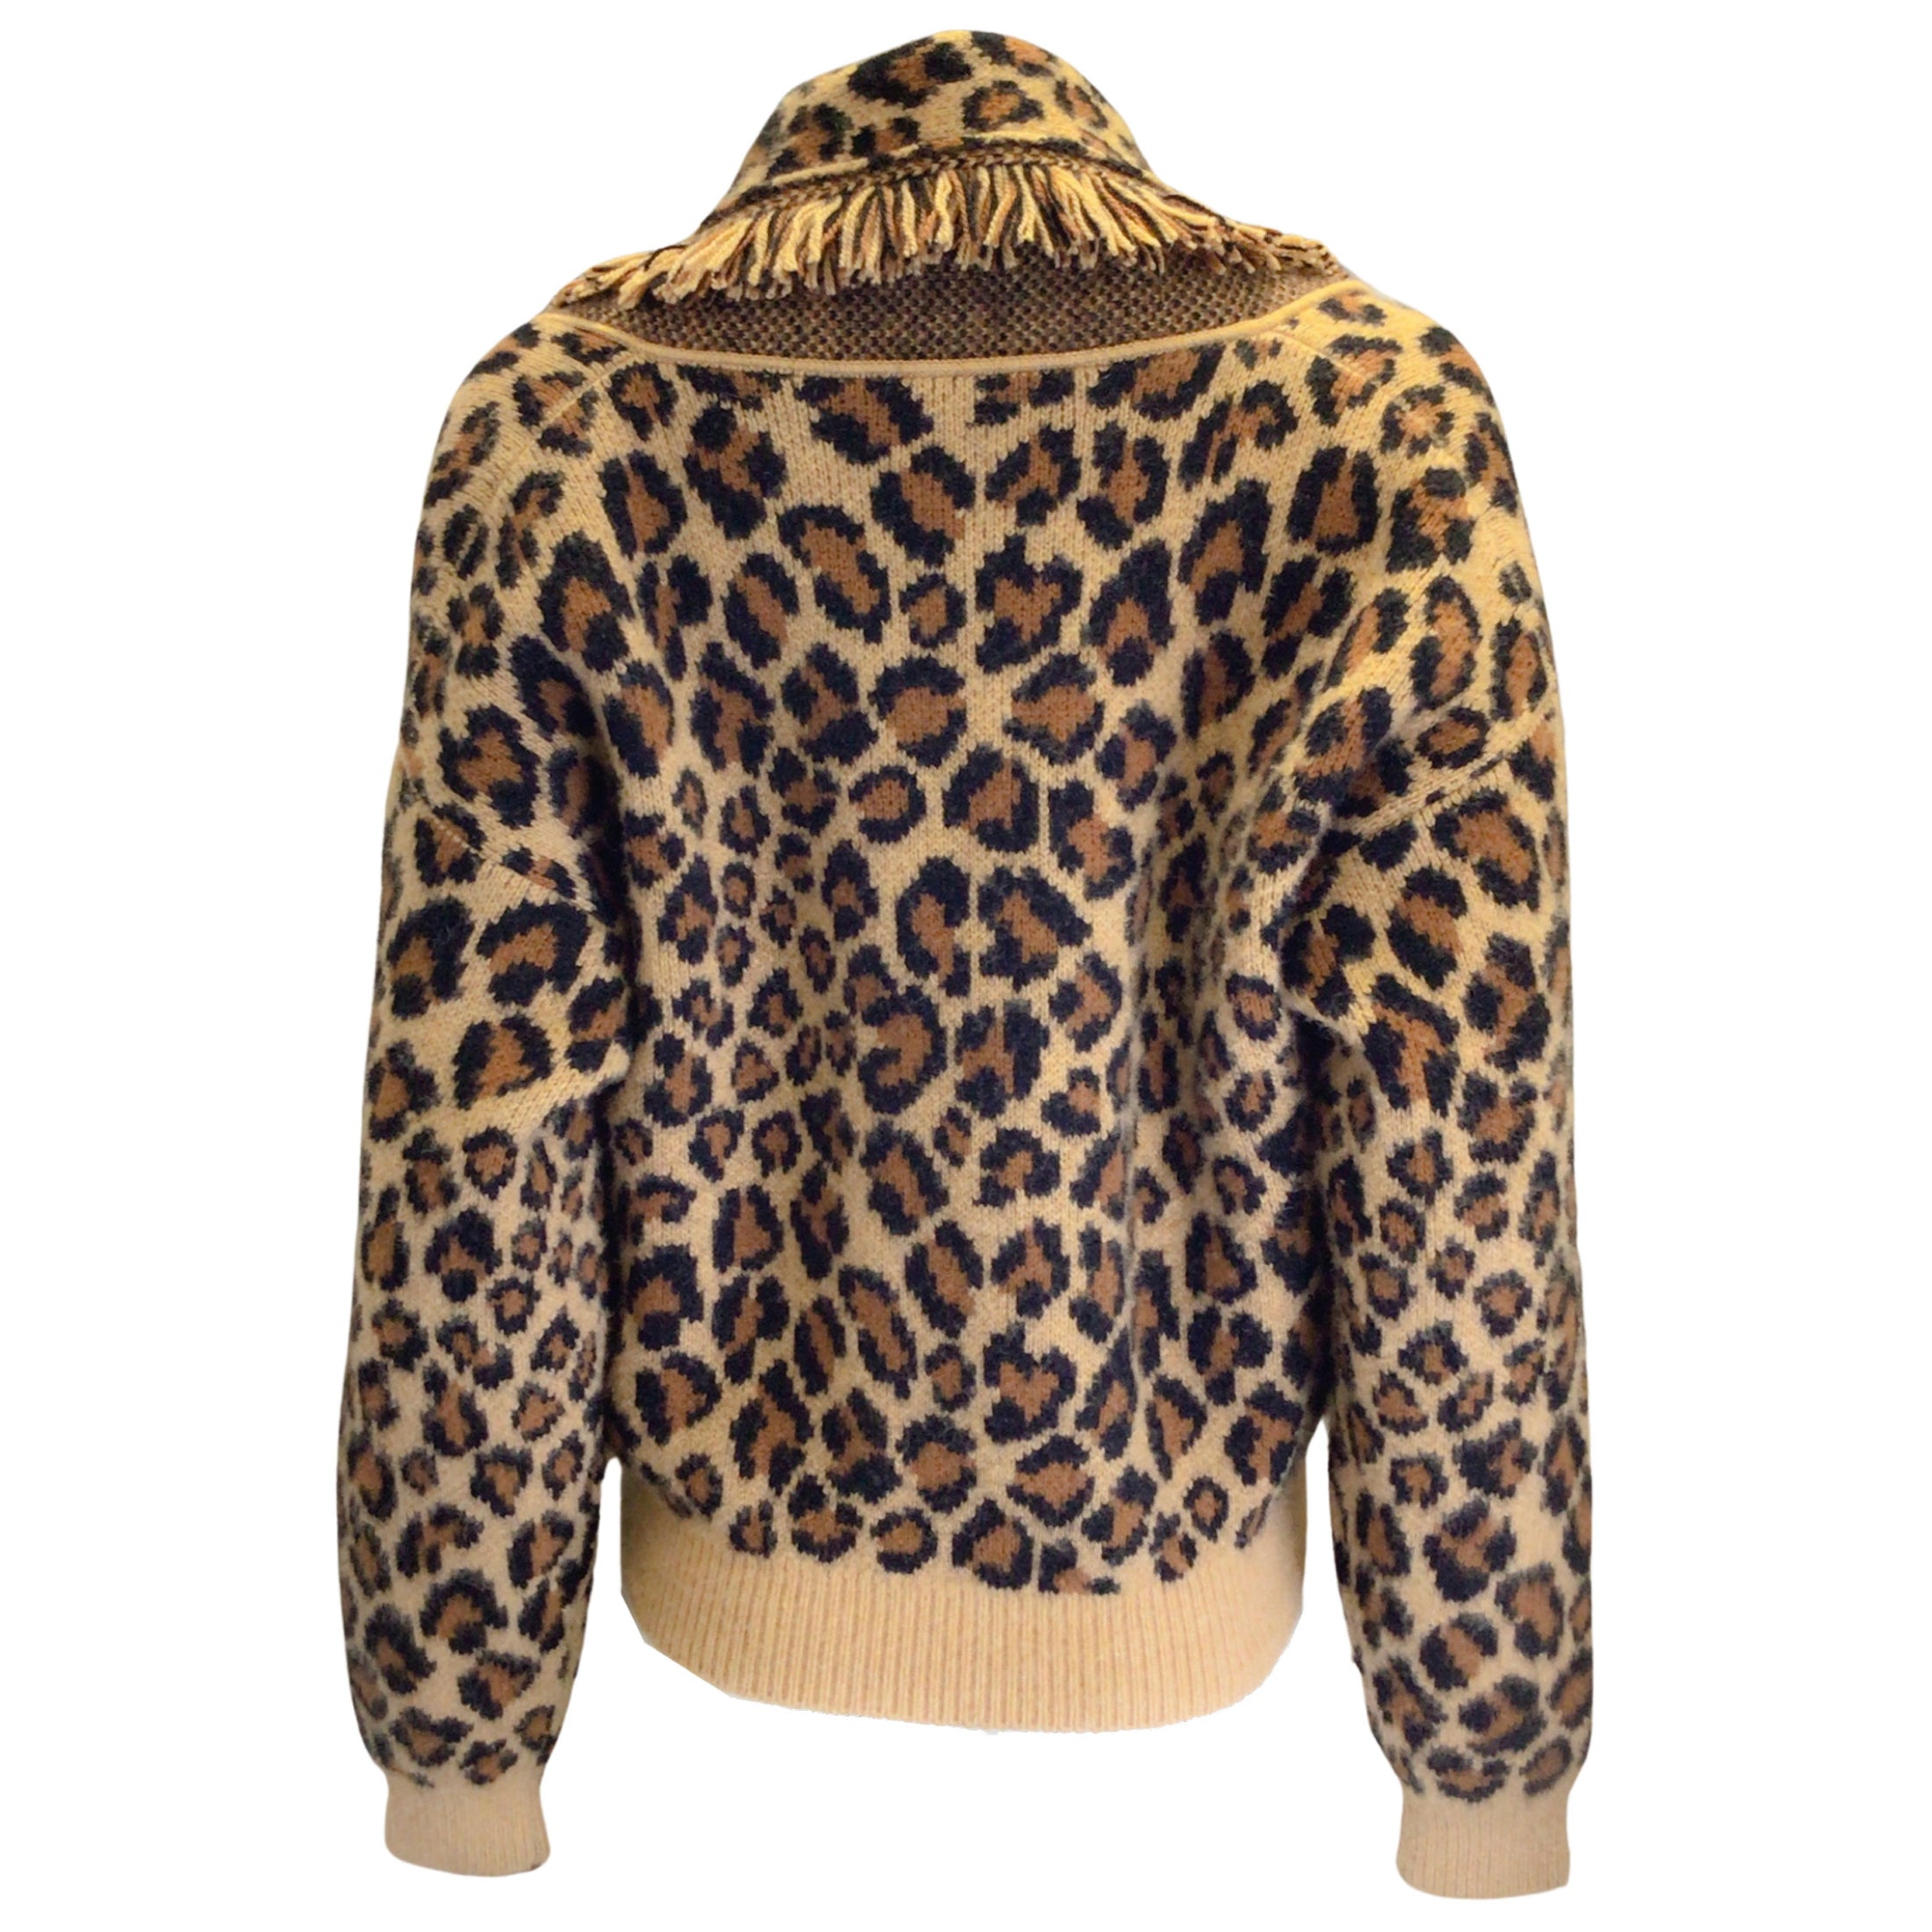 Alanui Tan / Brown / Black Leopard Printed Fringed Trim Long Sleeved Deep V-Neck Cashmere and Wool Knit Sweater